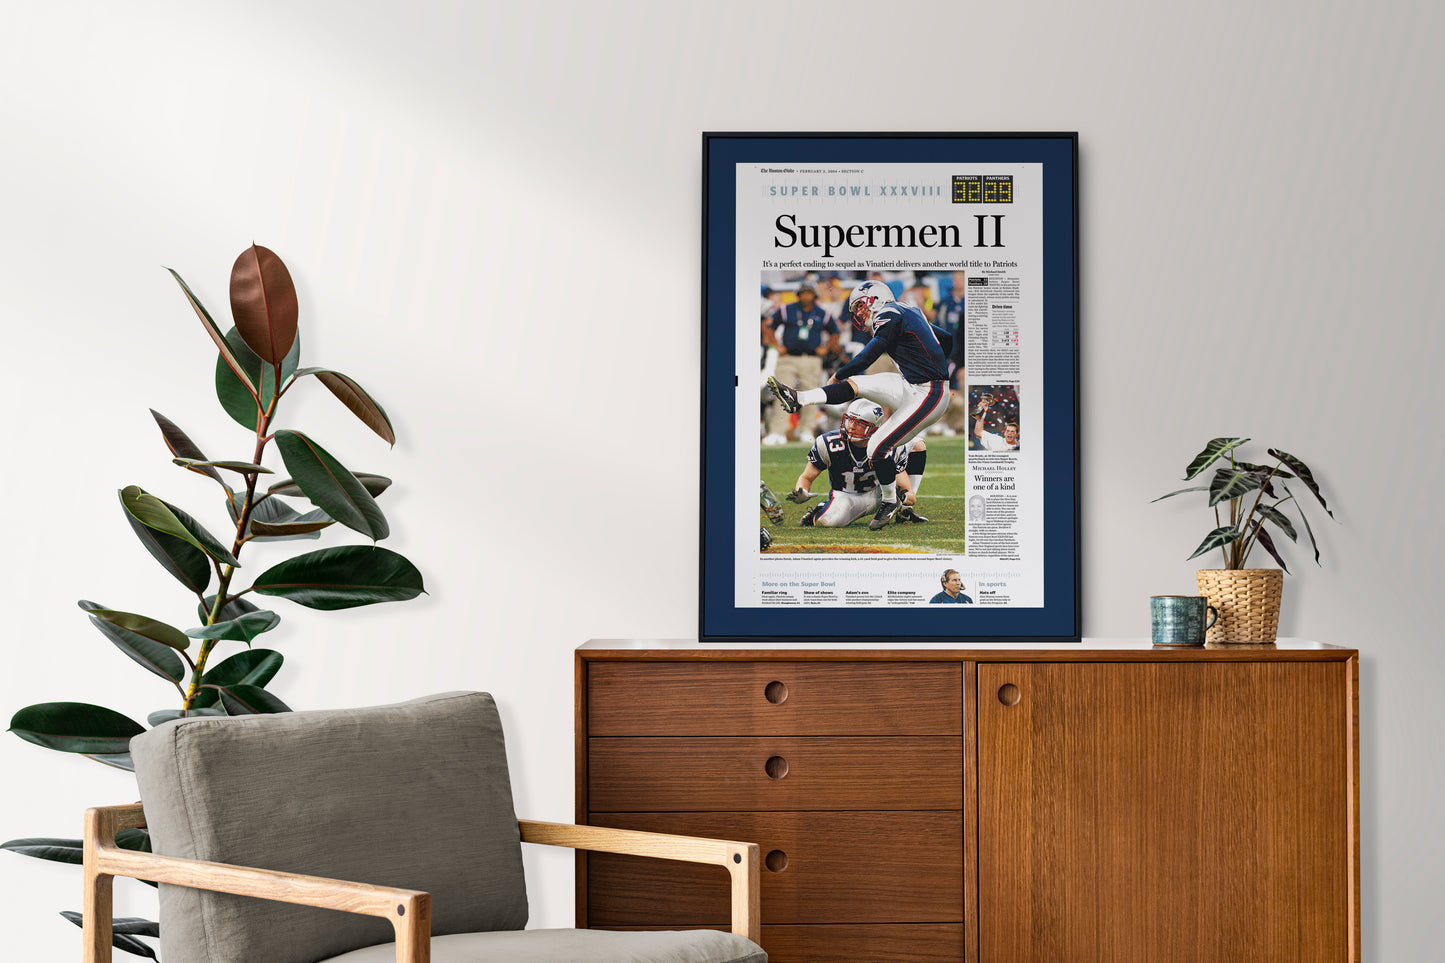 New England Patriots 2004 Super Bowl NFL Champions Front Cover The Boston Globe Newspaper Poster